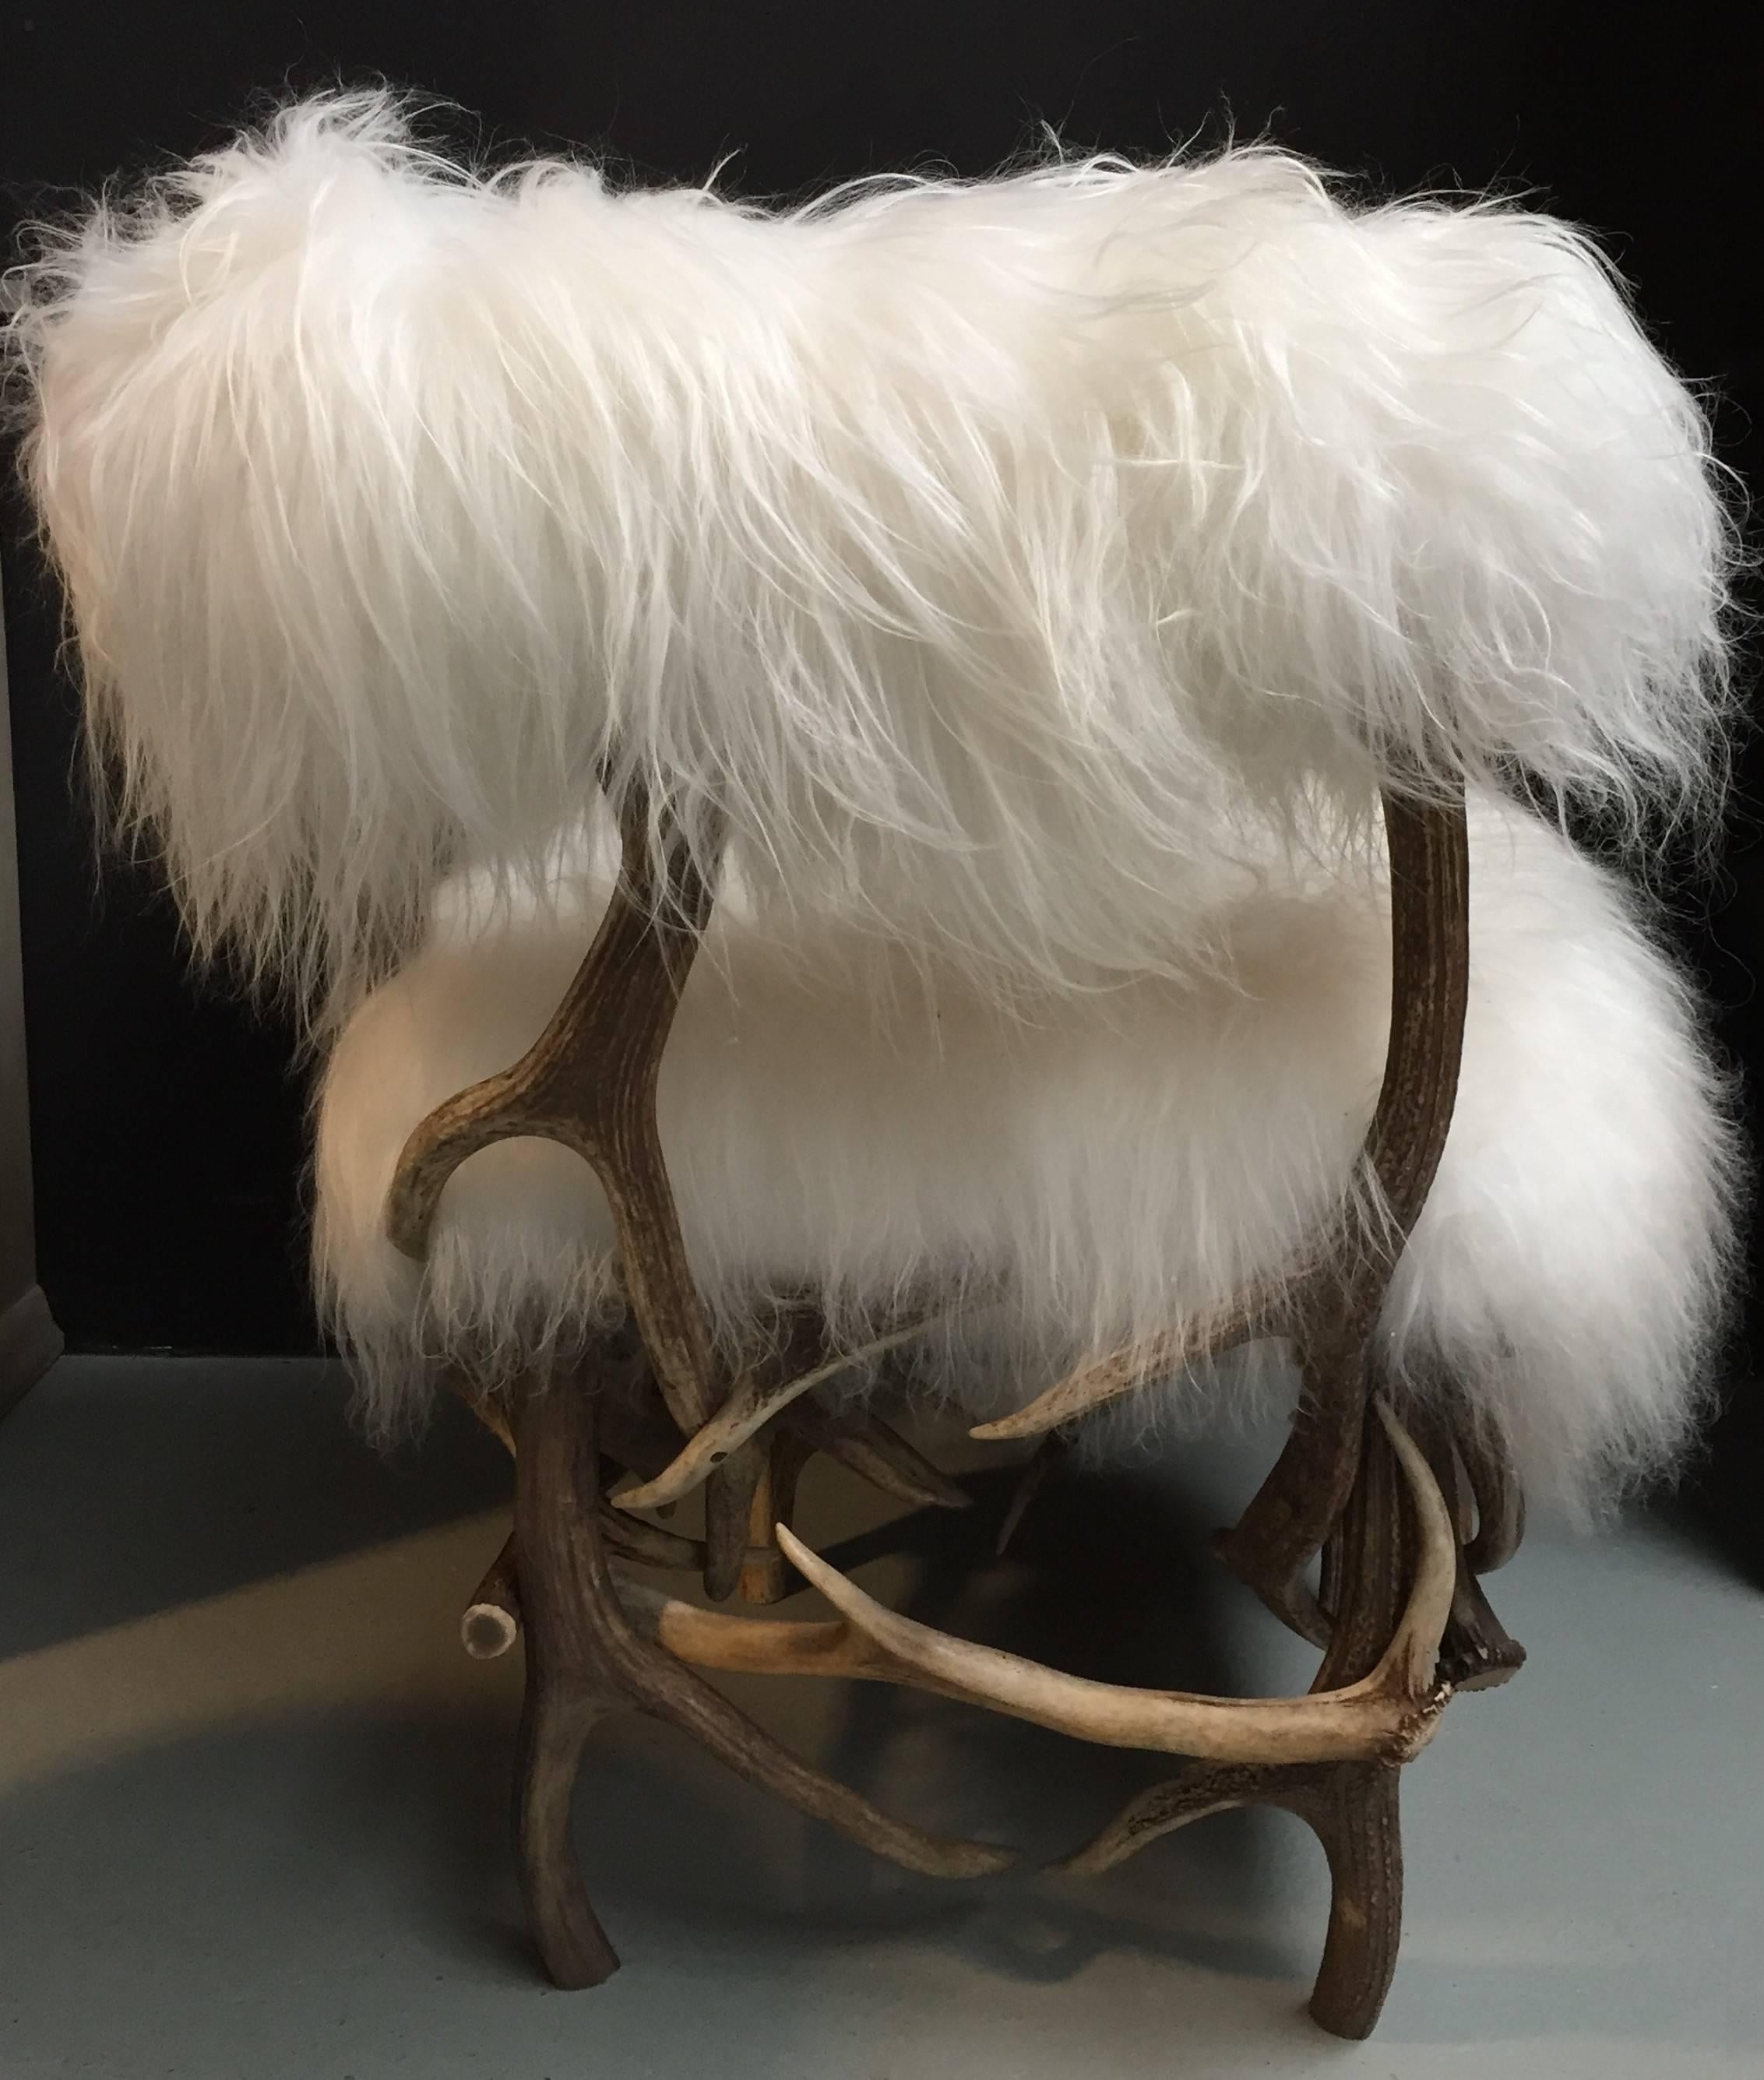 Chair from red deer antlers upholstered with snow white Iceland sheepskin.
Great decorative piece for in a chalet or mancave.

 